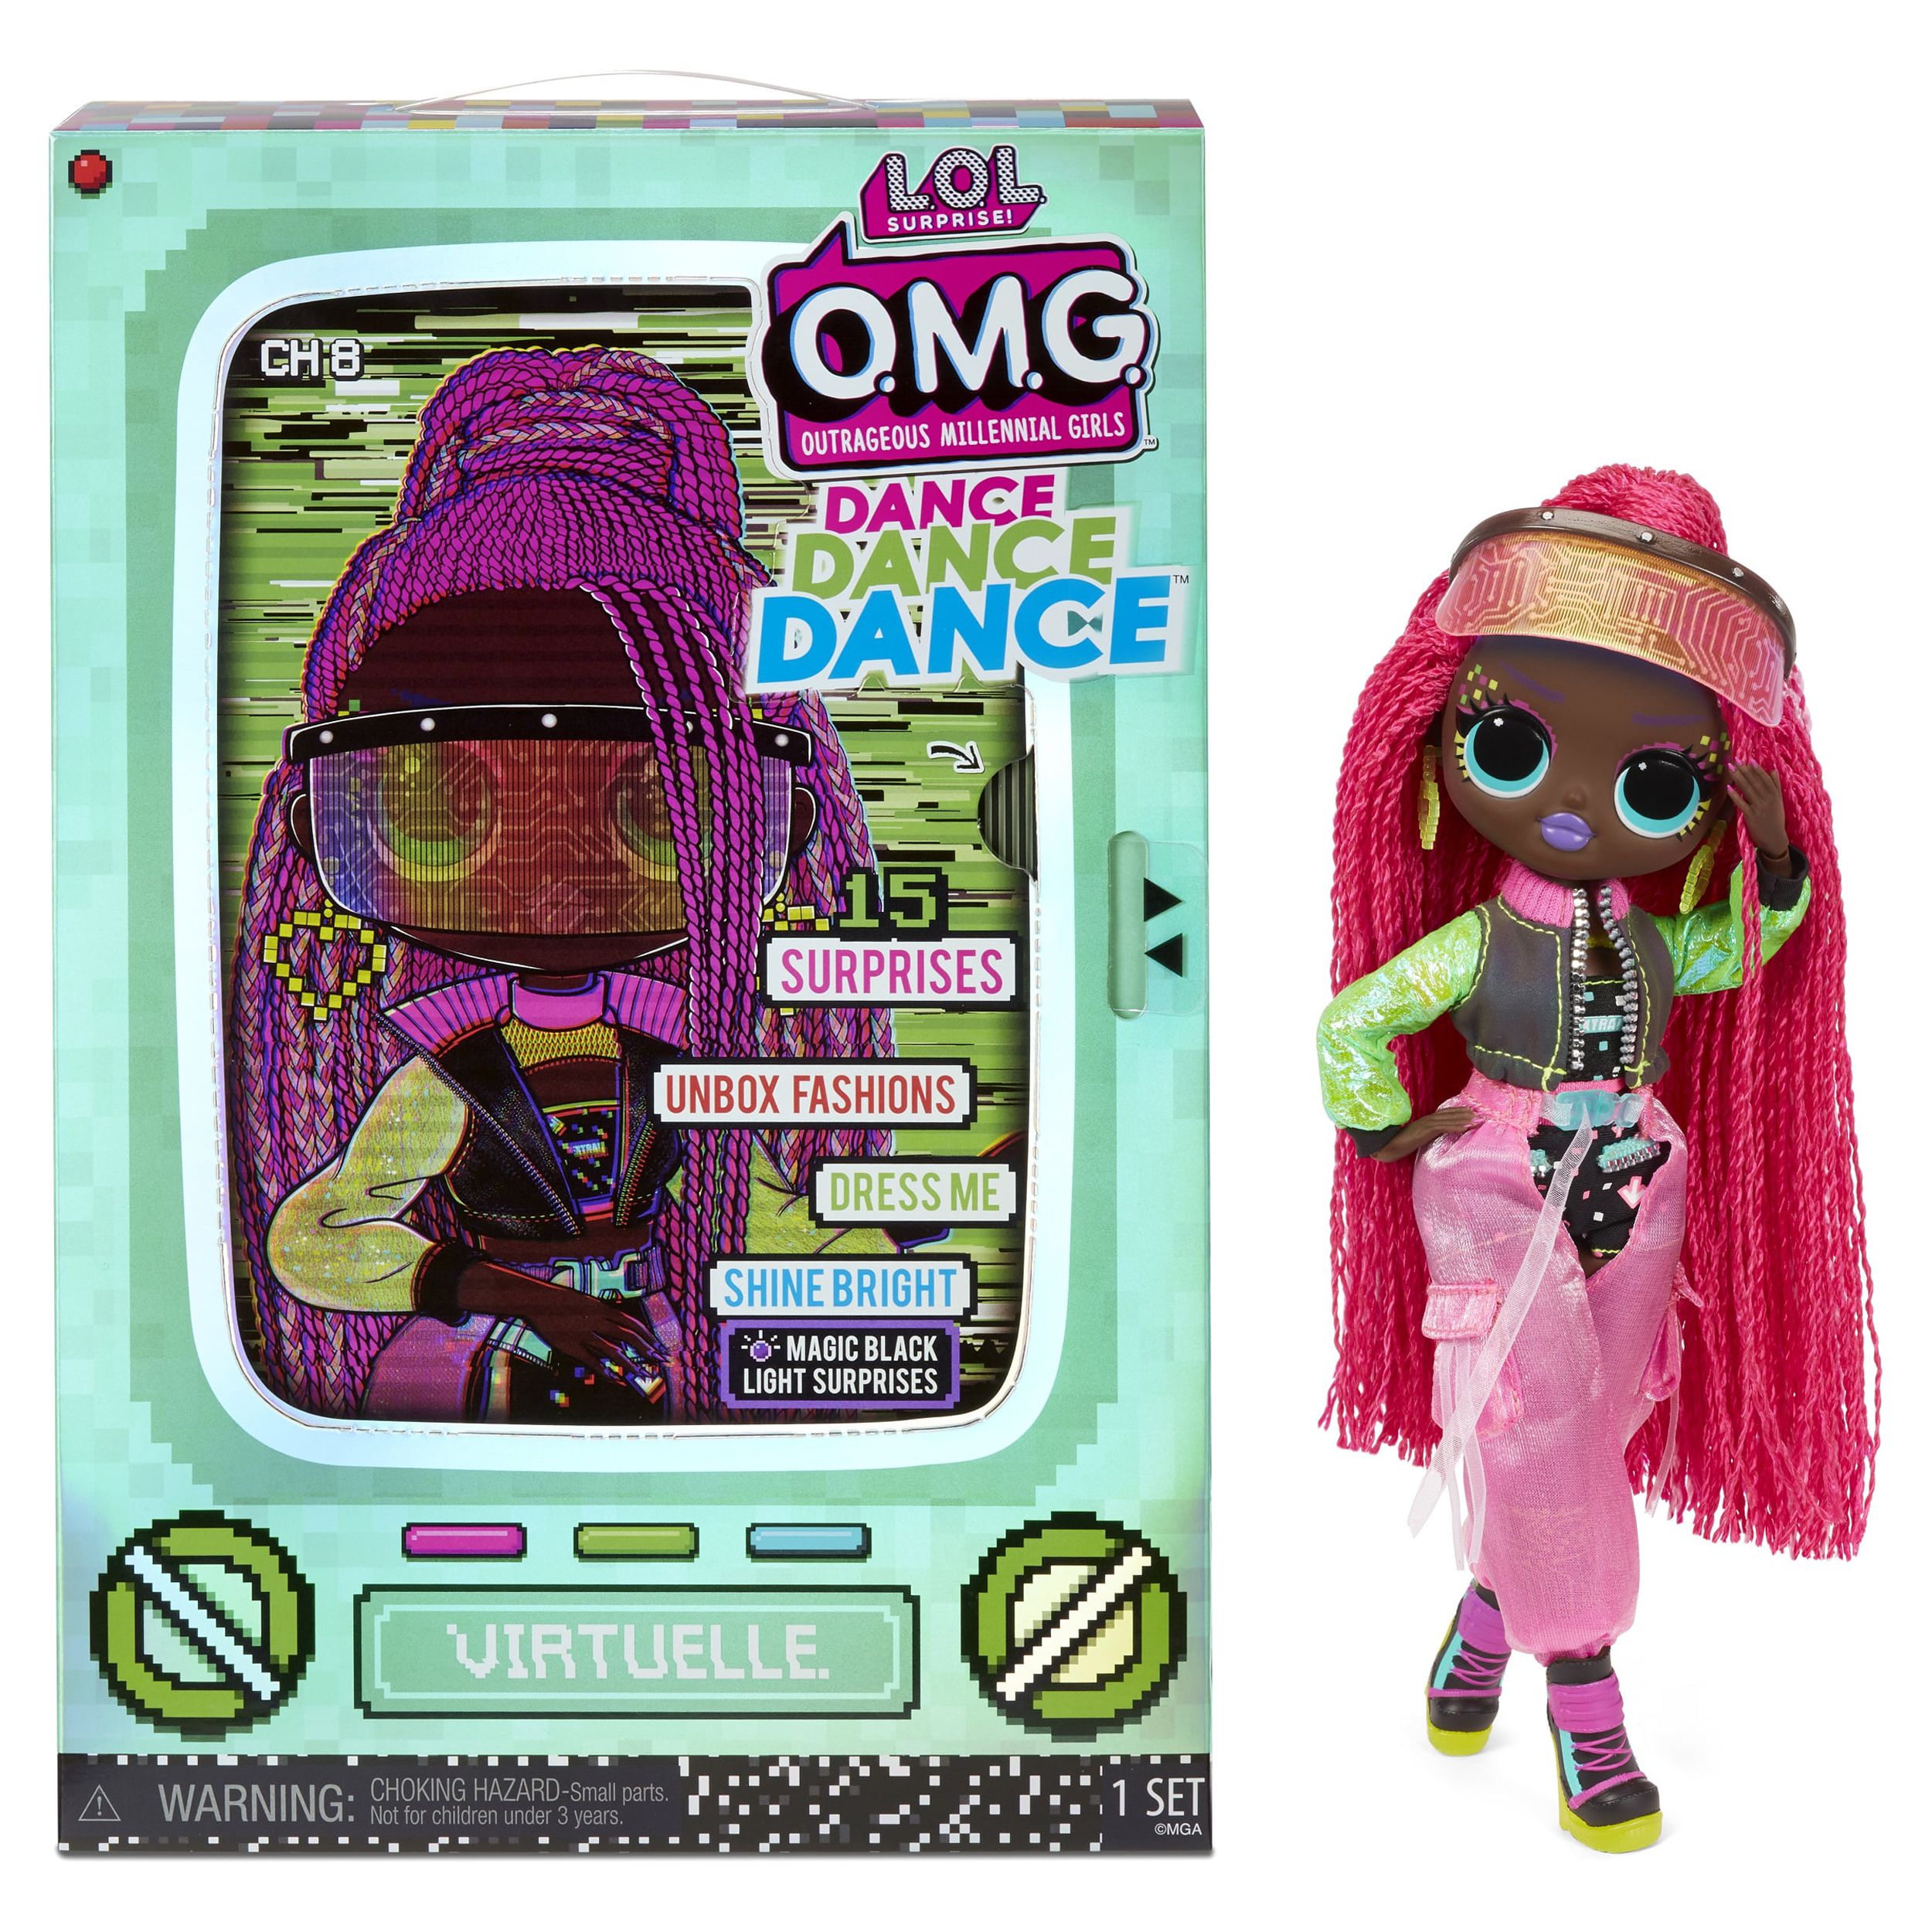 LOL Surprise OMG Dance Dance Dance Virtuelle Fashion Doll with 15 Surprises Including Magic Blacklight, Shoes, Hair Brush, Doll Stand and TV Package - For Girls Ages 4+ - image 1 of 7